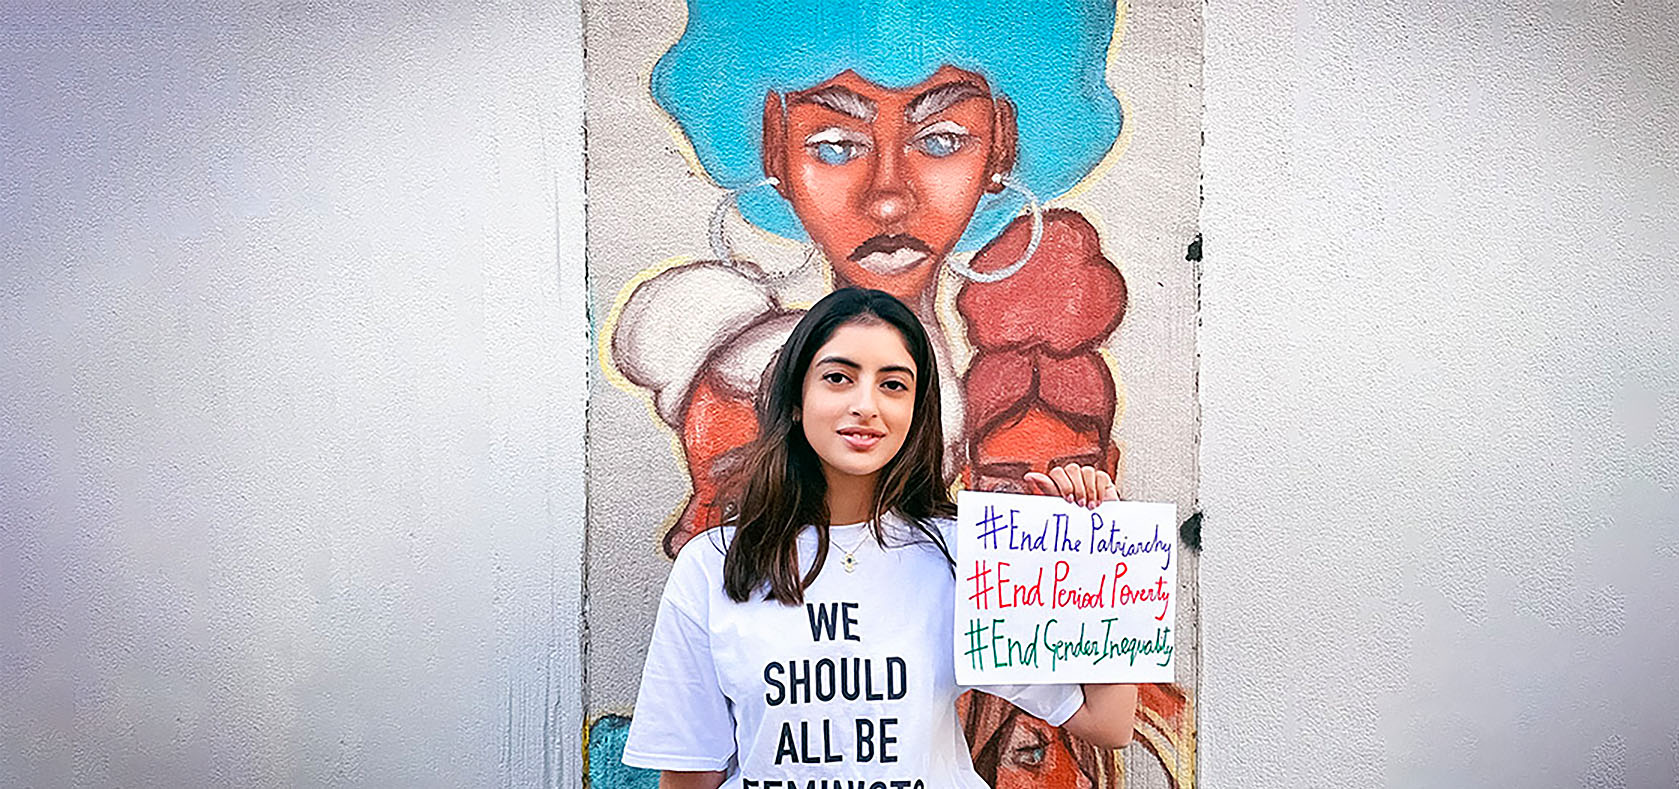 Nanda shows her messages outside Fashion Institute of Technology In New York City, on 3 April 2021. Behind her is a student-painted mural on the theme of Black Lives Matter, with a focus on empowering black women. Courtesy of Gauri Kanade